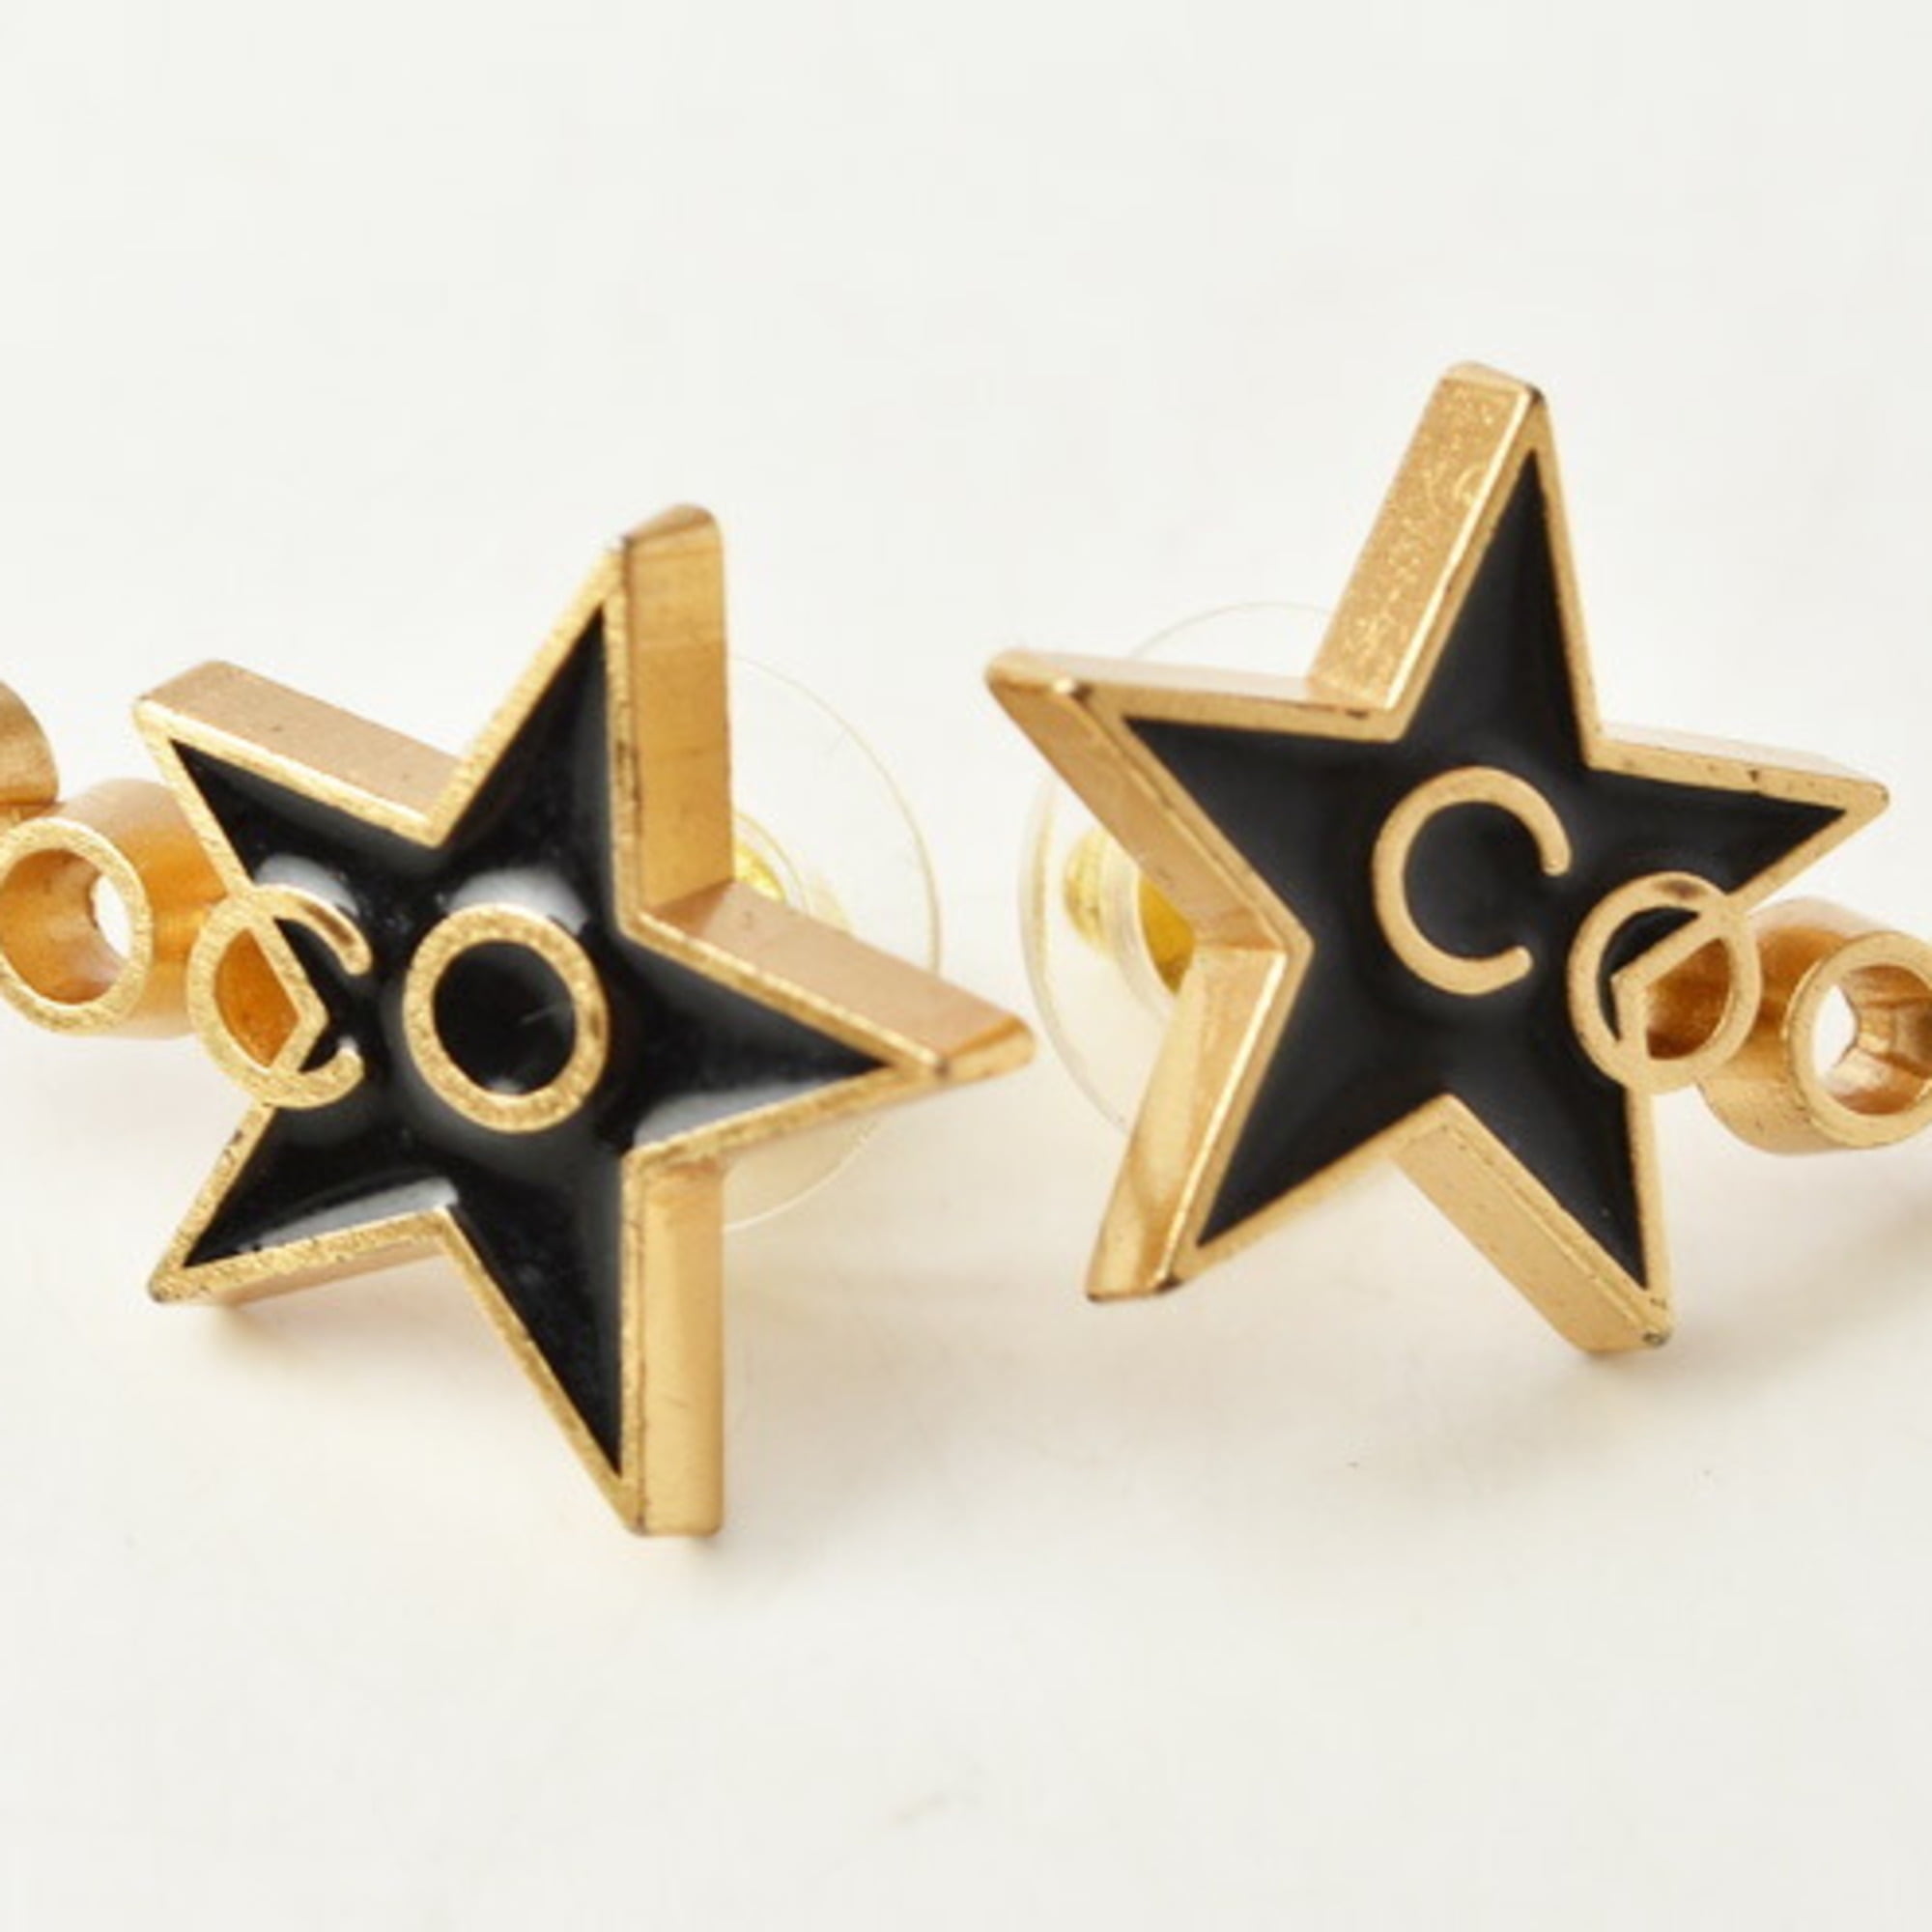 Authenticated Used Chanel Earrings CHANEL COCO/Star Black/Gold